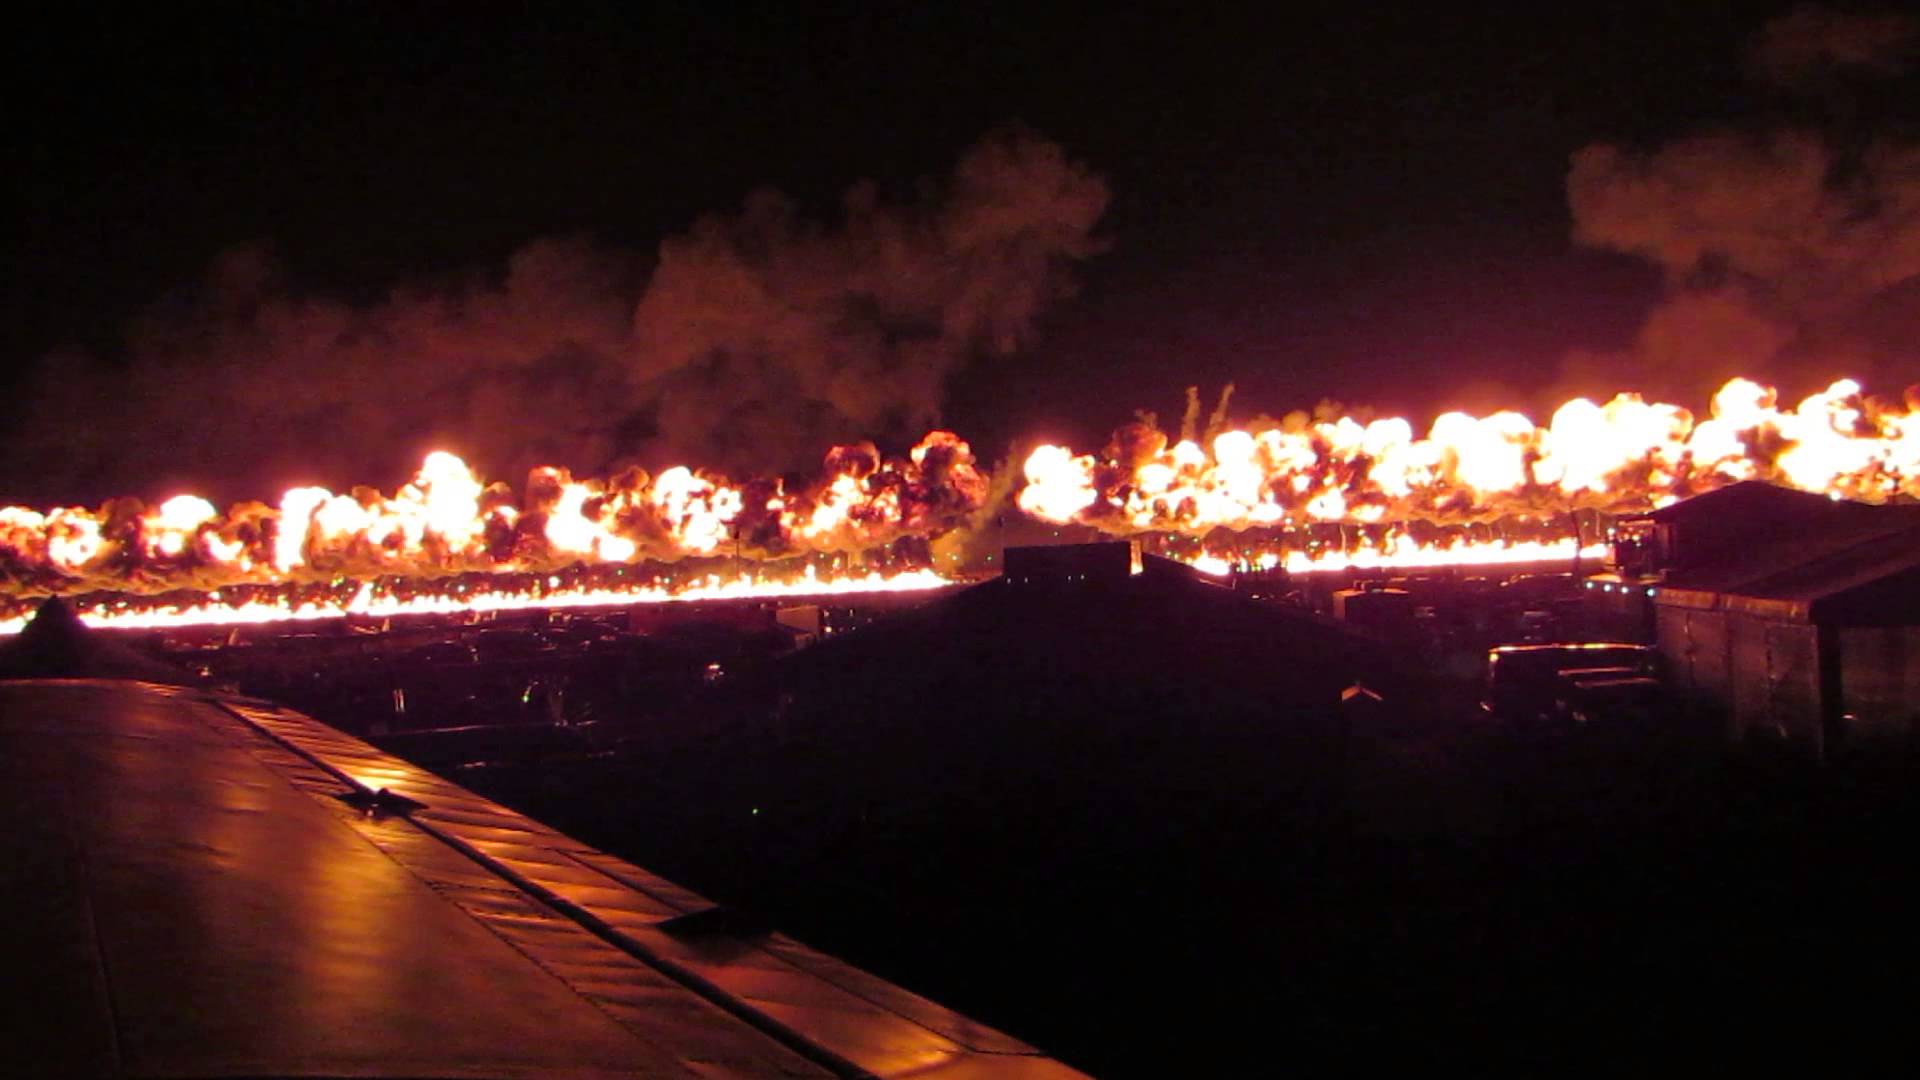 Wall of Fire - Night Air Show AirVenture 2013 - YouTube